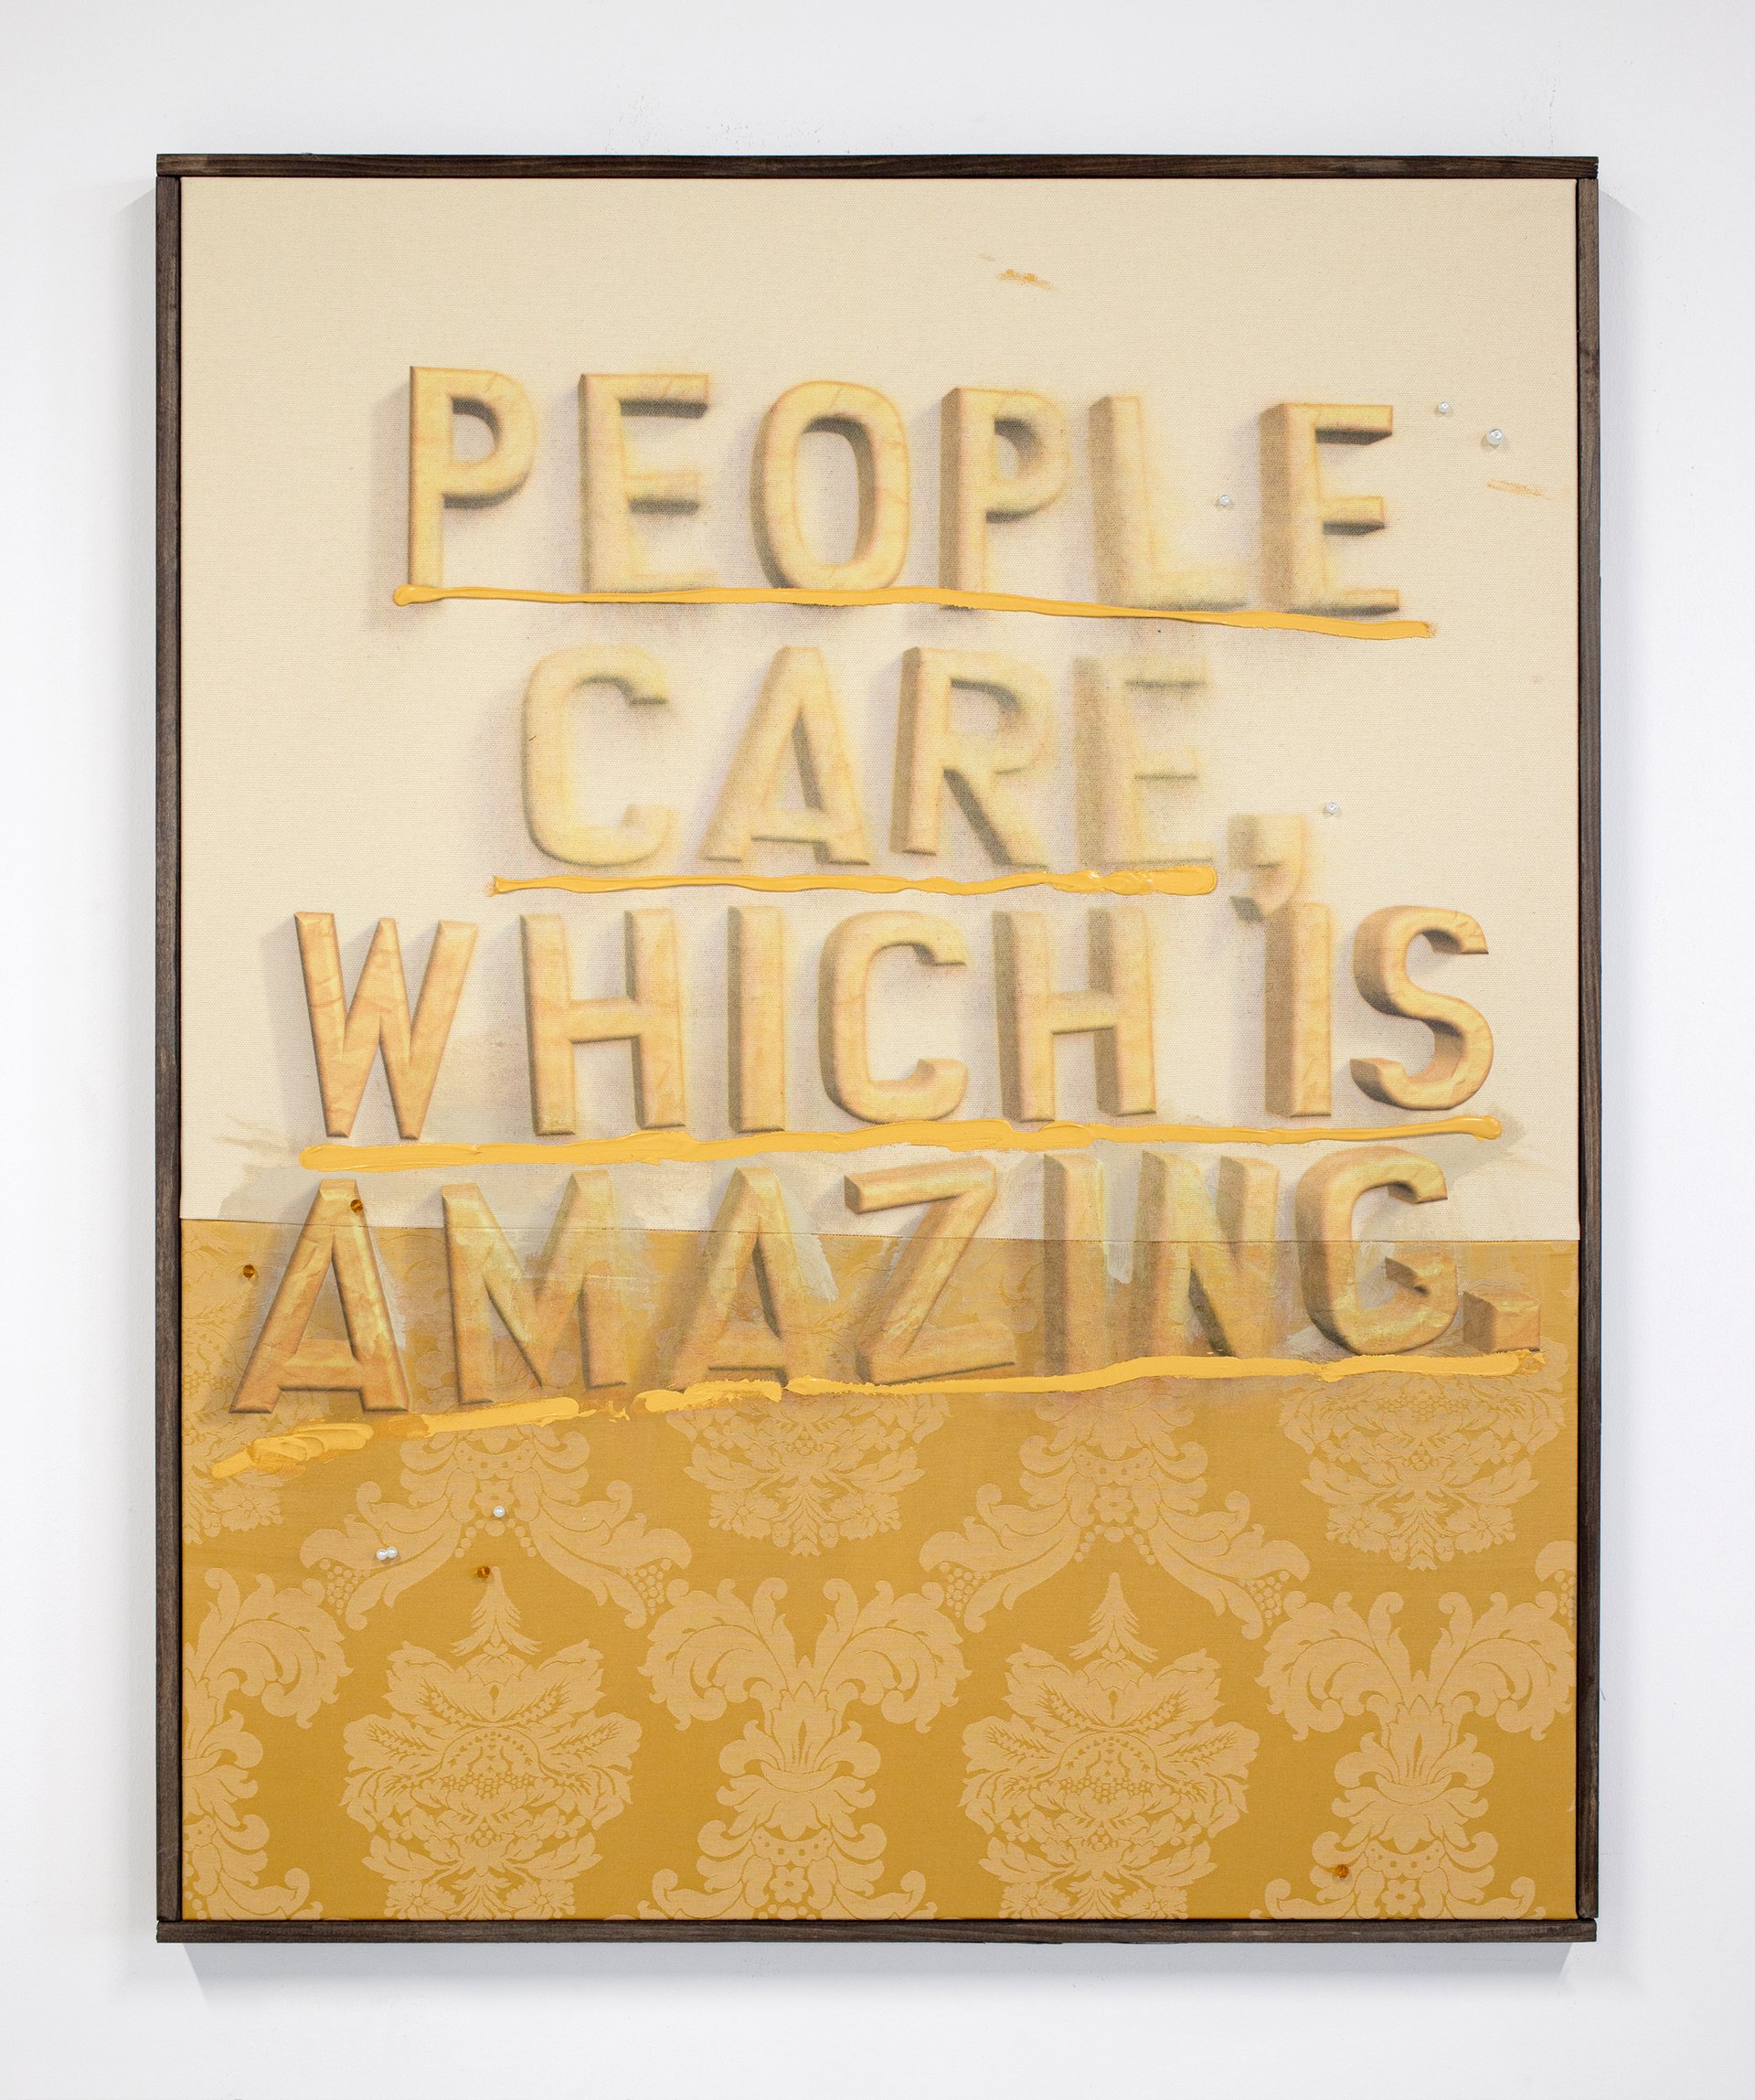 Philipp TimischlPeople care, which is amazing, 2020Acrylic paint on UV-direct print with spilled pearls and crystals on various fabrics, artist frame80 x 100 cm